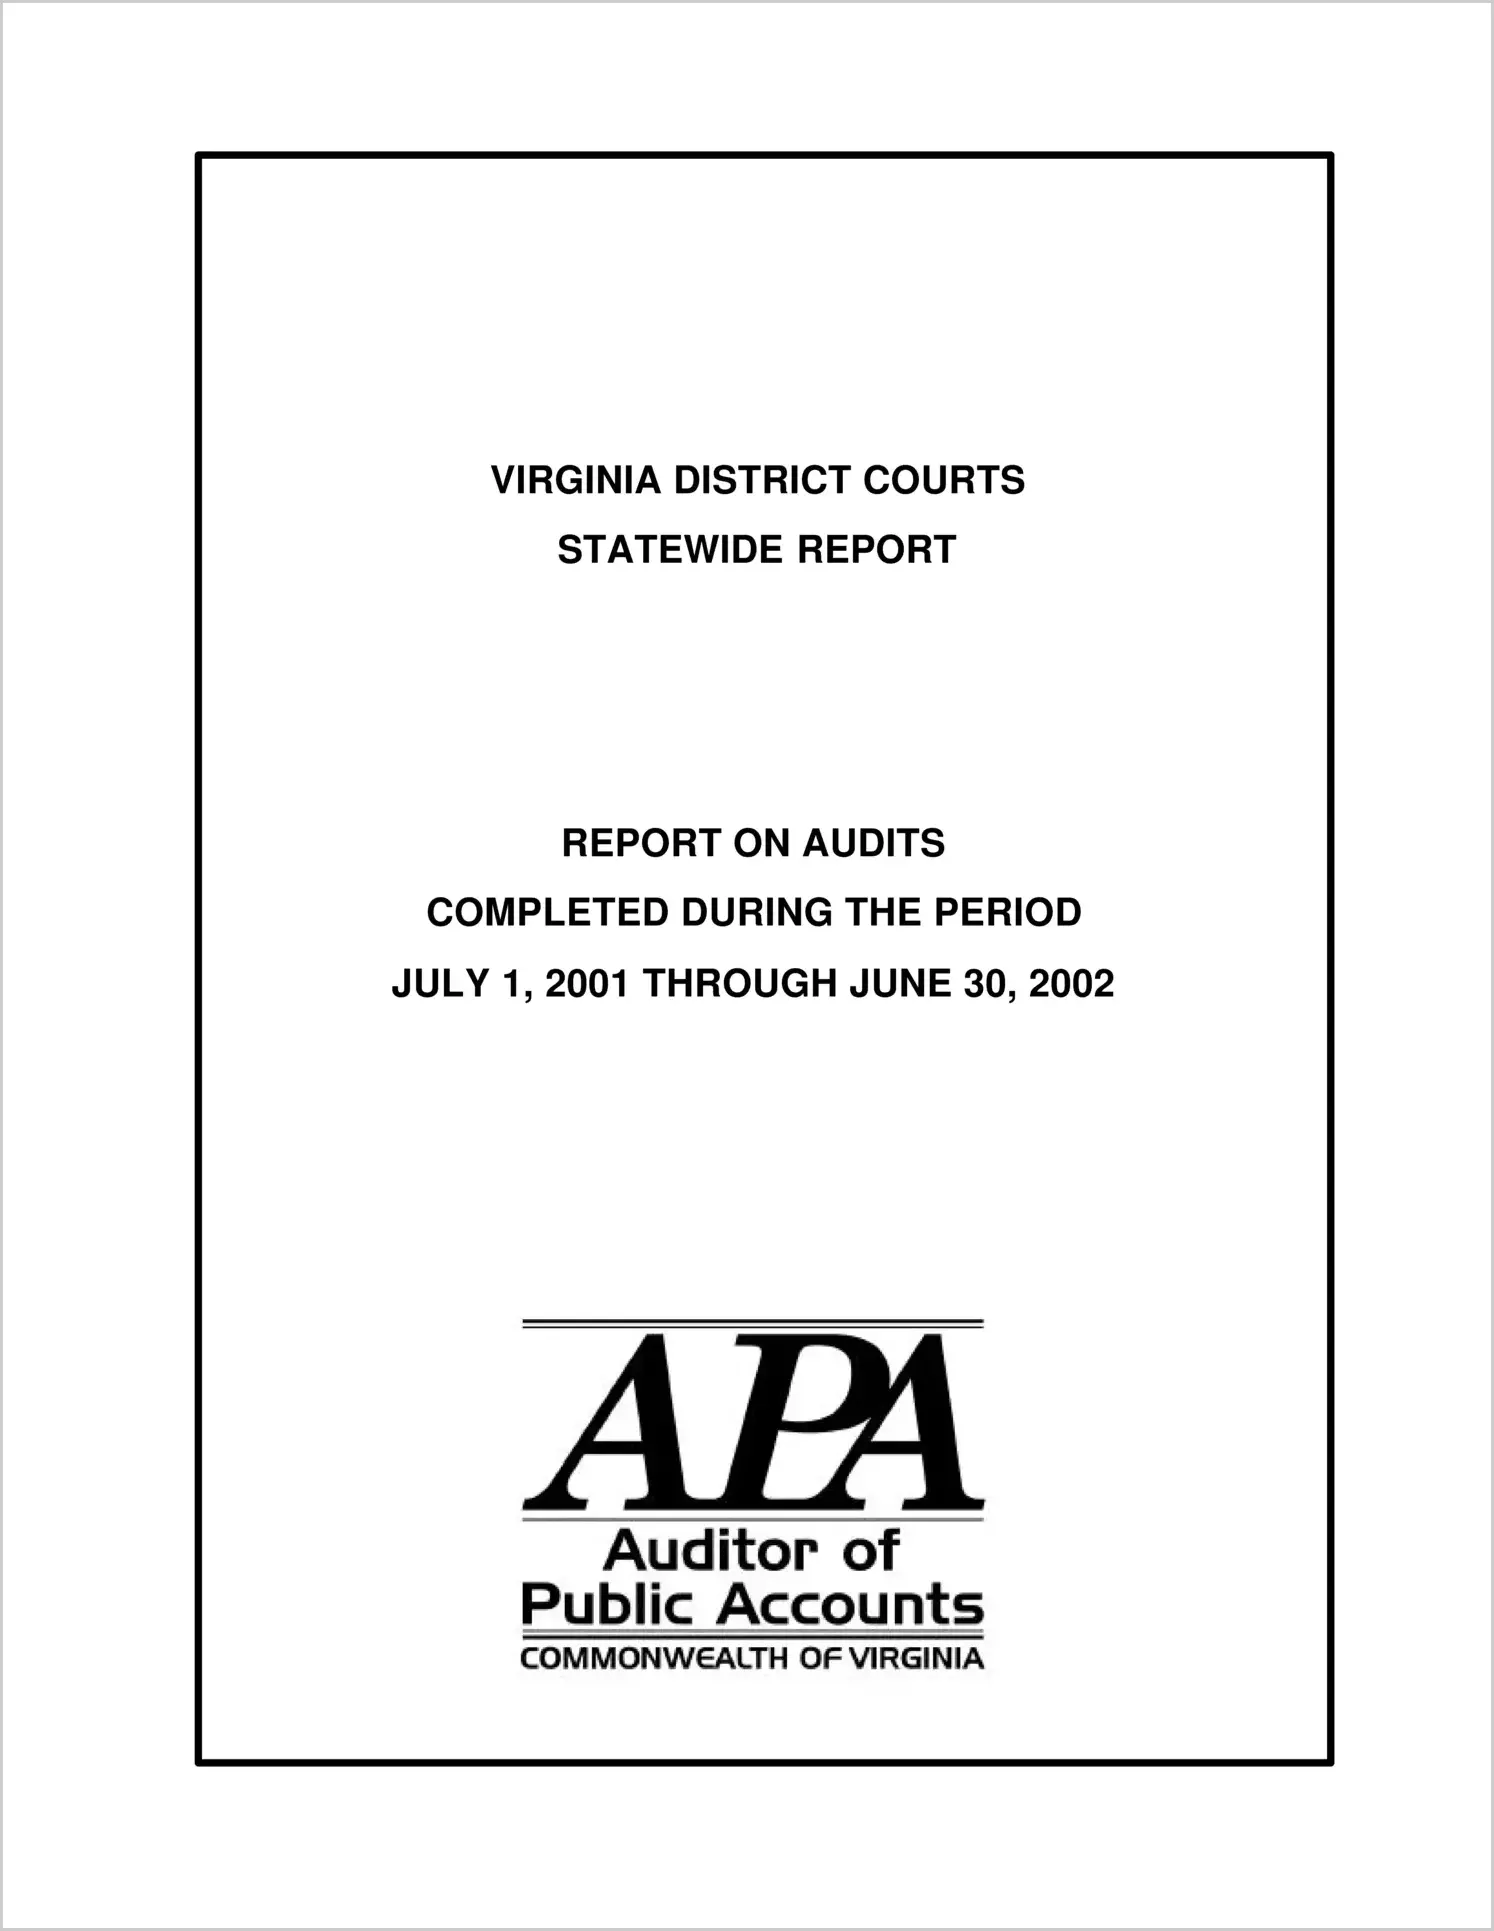 Virginia District Courts Statewide Report during the period July 1, 2001 through June 30, 2002